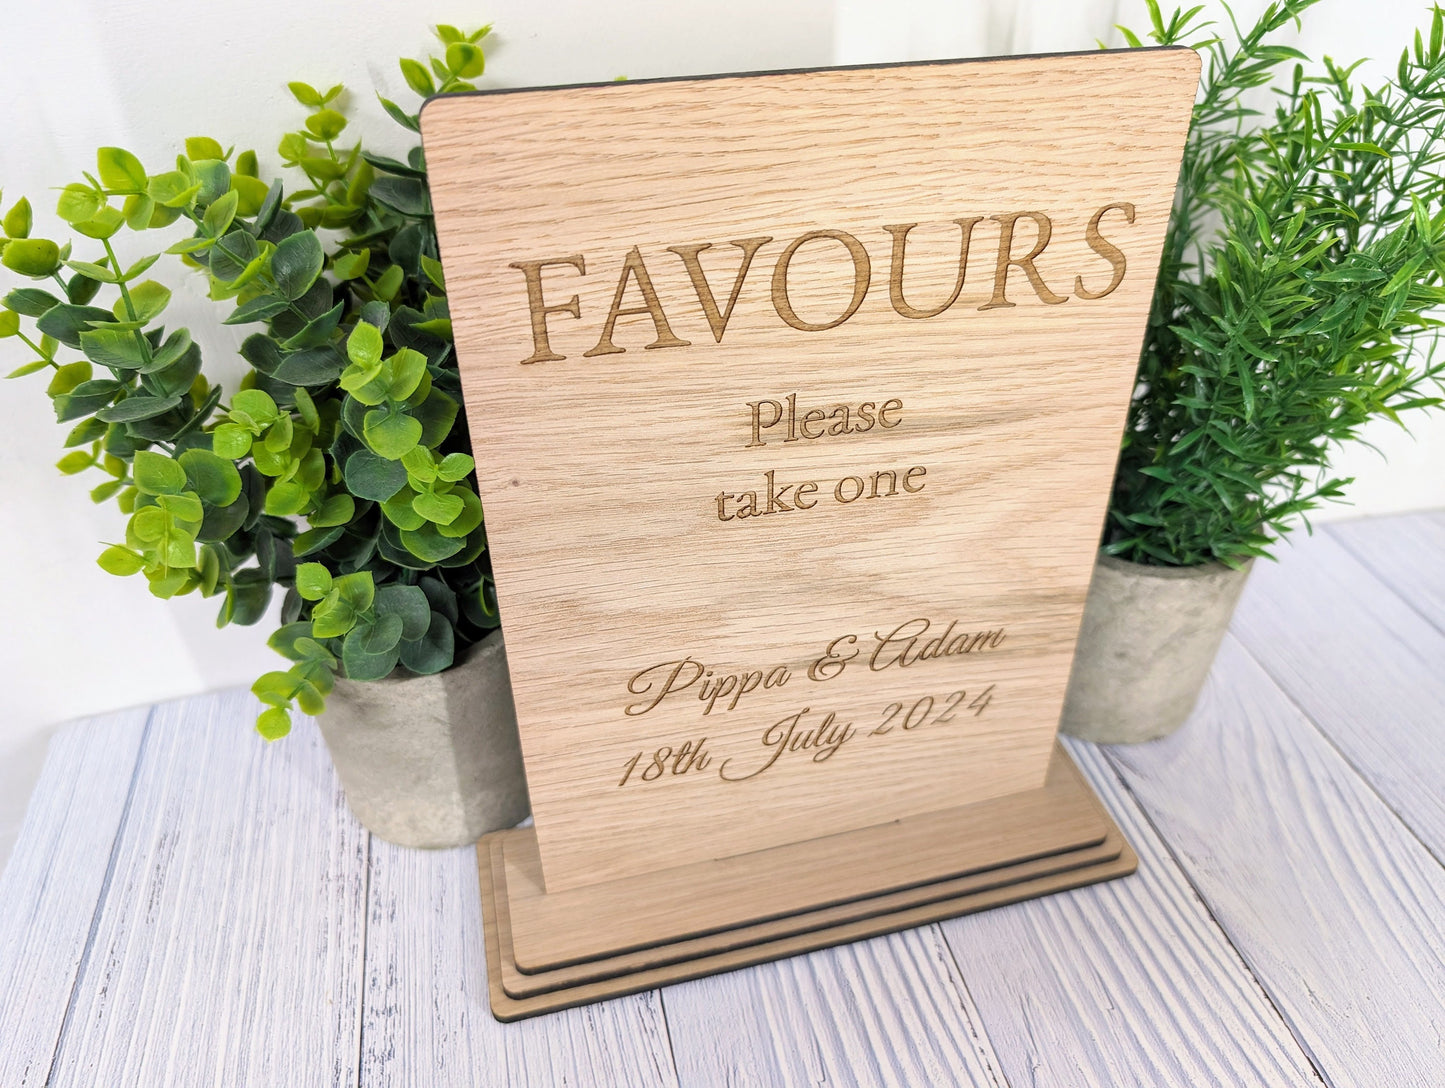 Personalised Wedding XL Table XL Sign 'Favours - Please Take One' - Custom Couples' Name, Date, Wooden Sign, Couples, Venue Planners